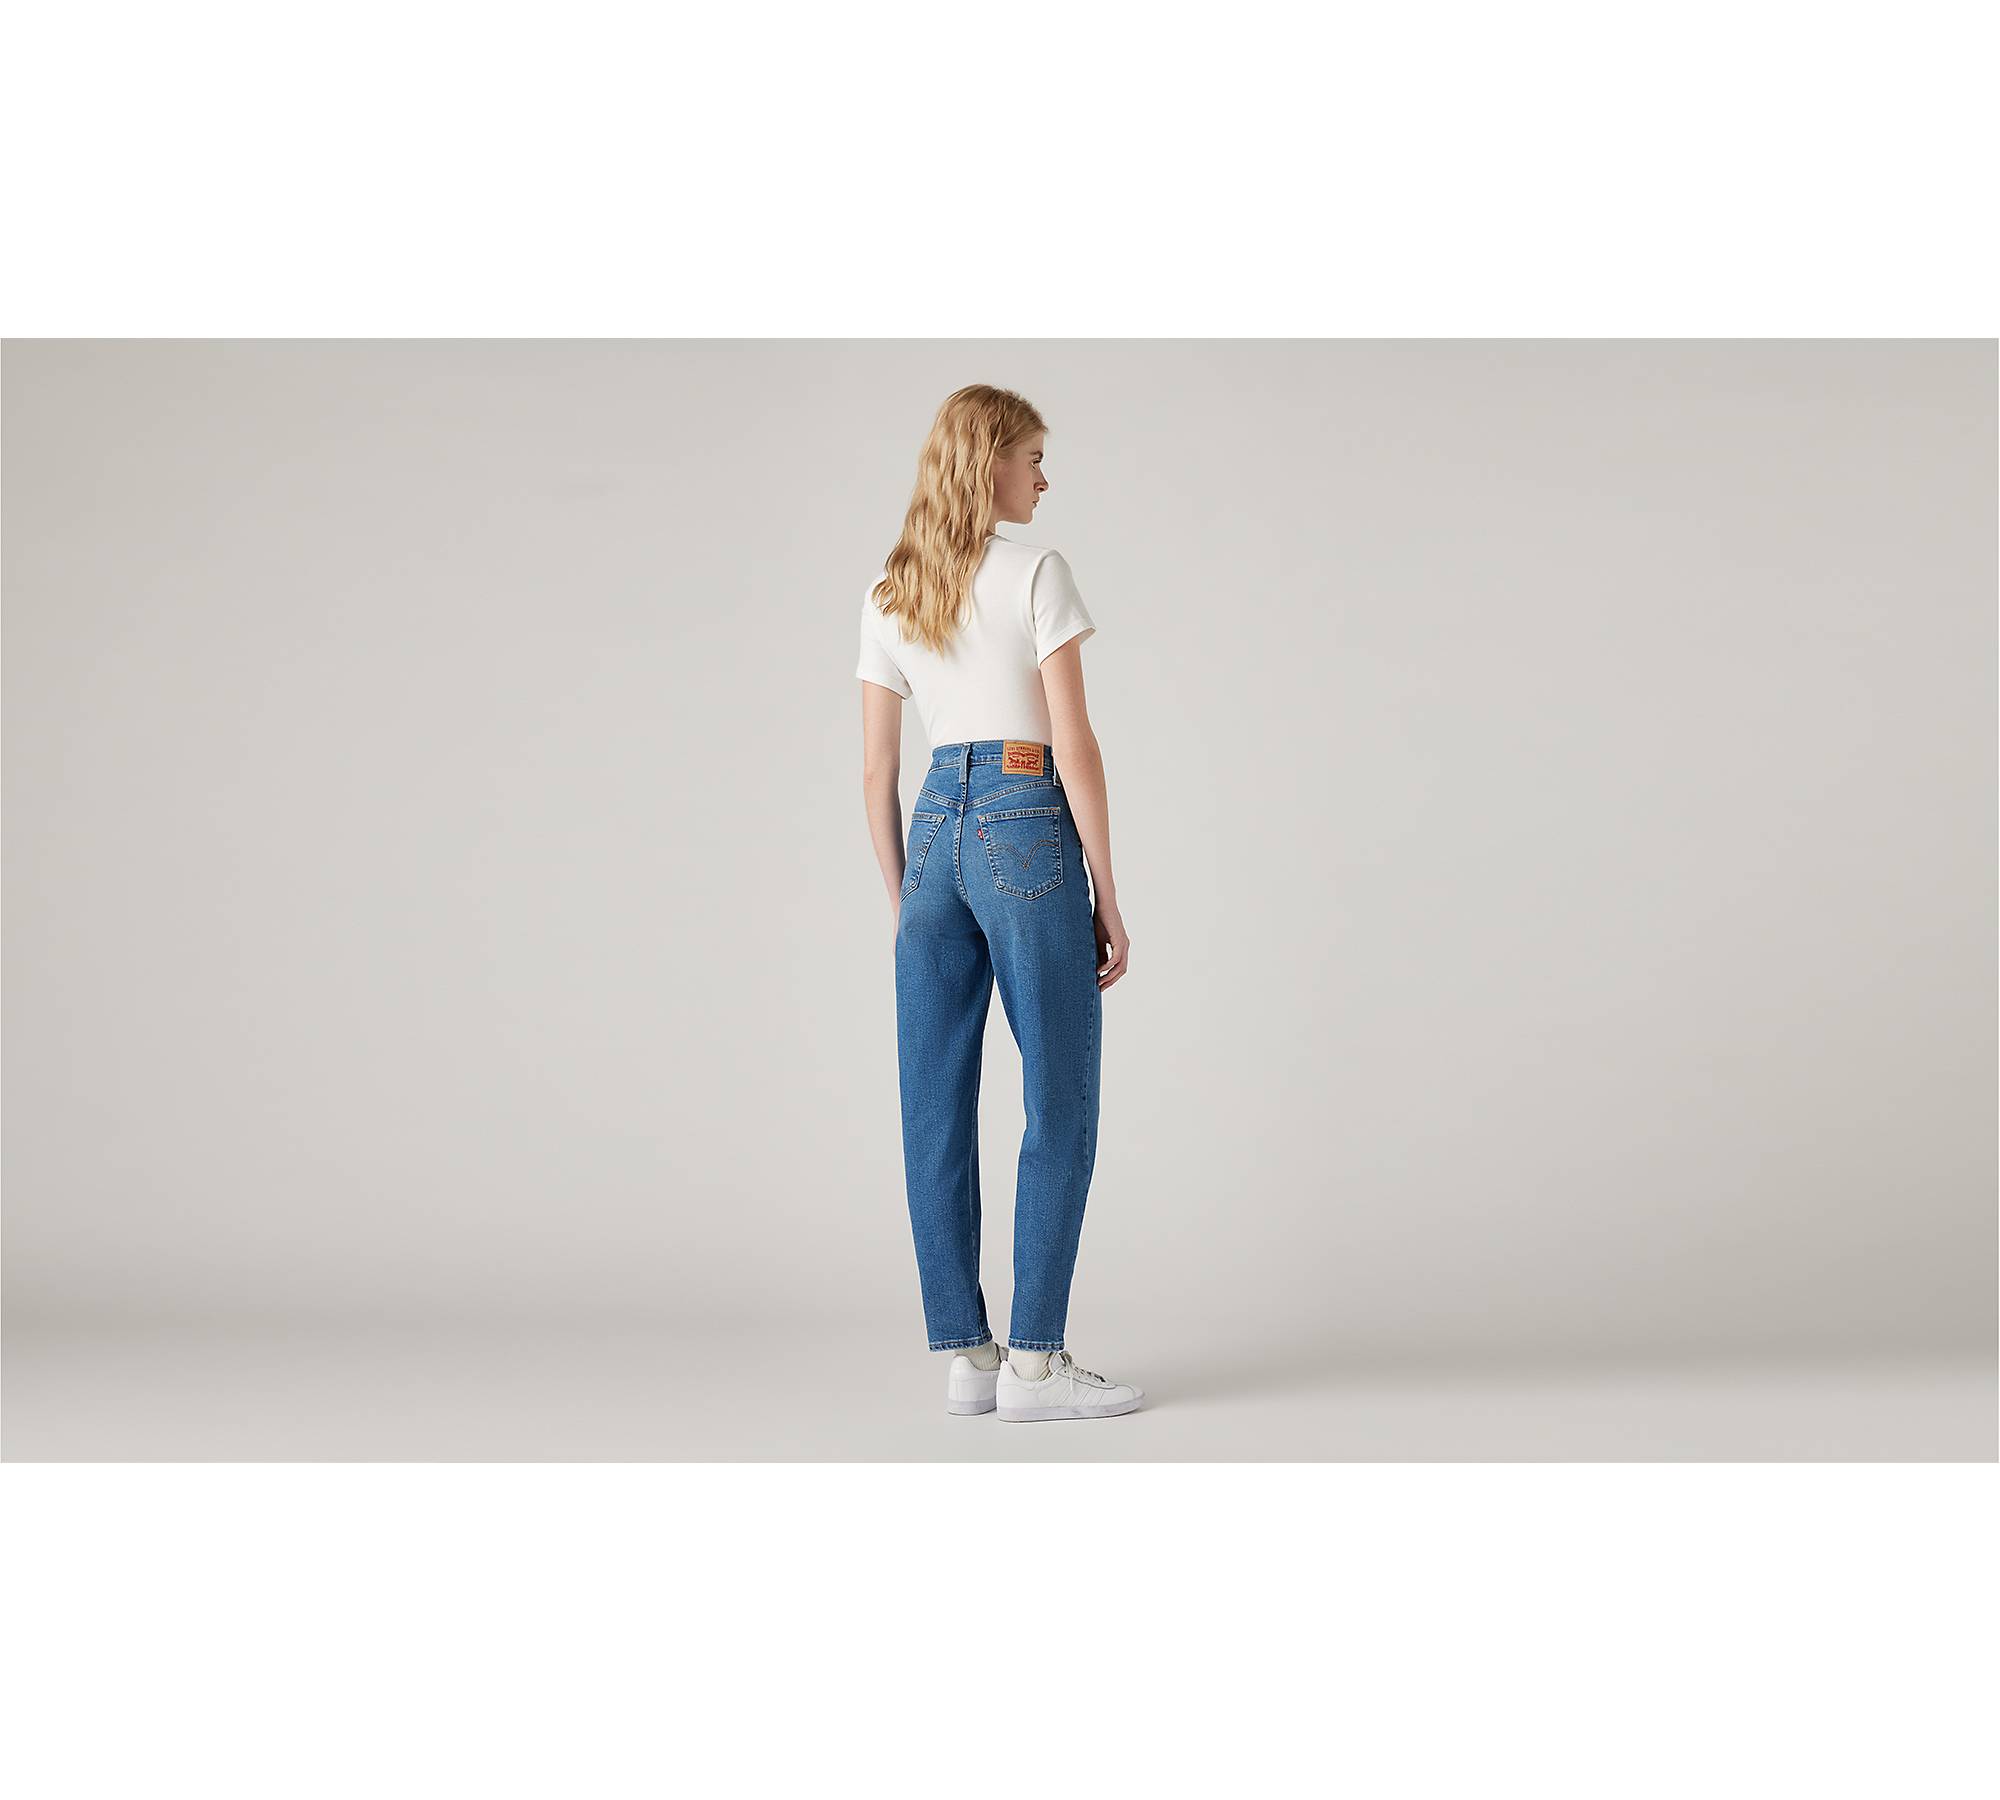 High-waisted jeans with metal fastening on the pockets :: LICHI